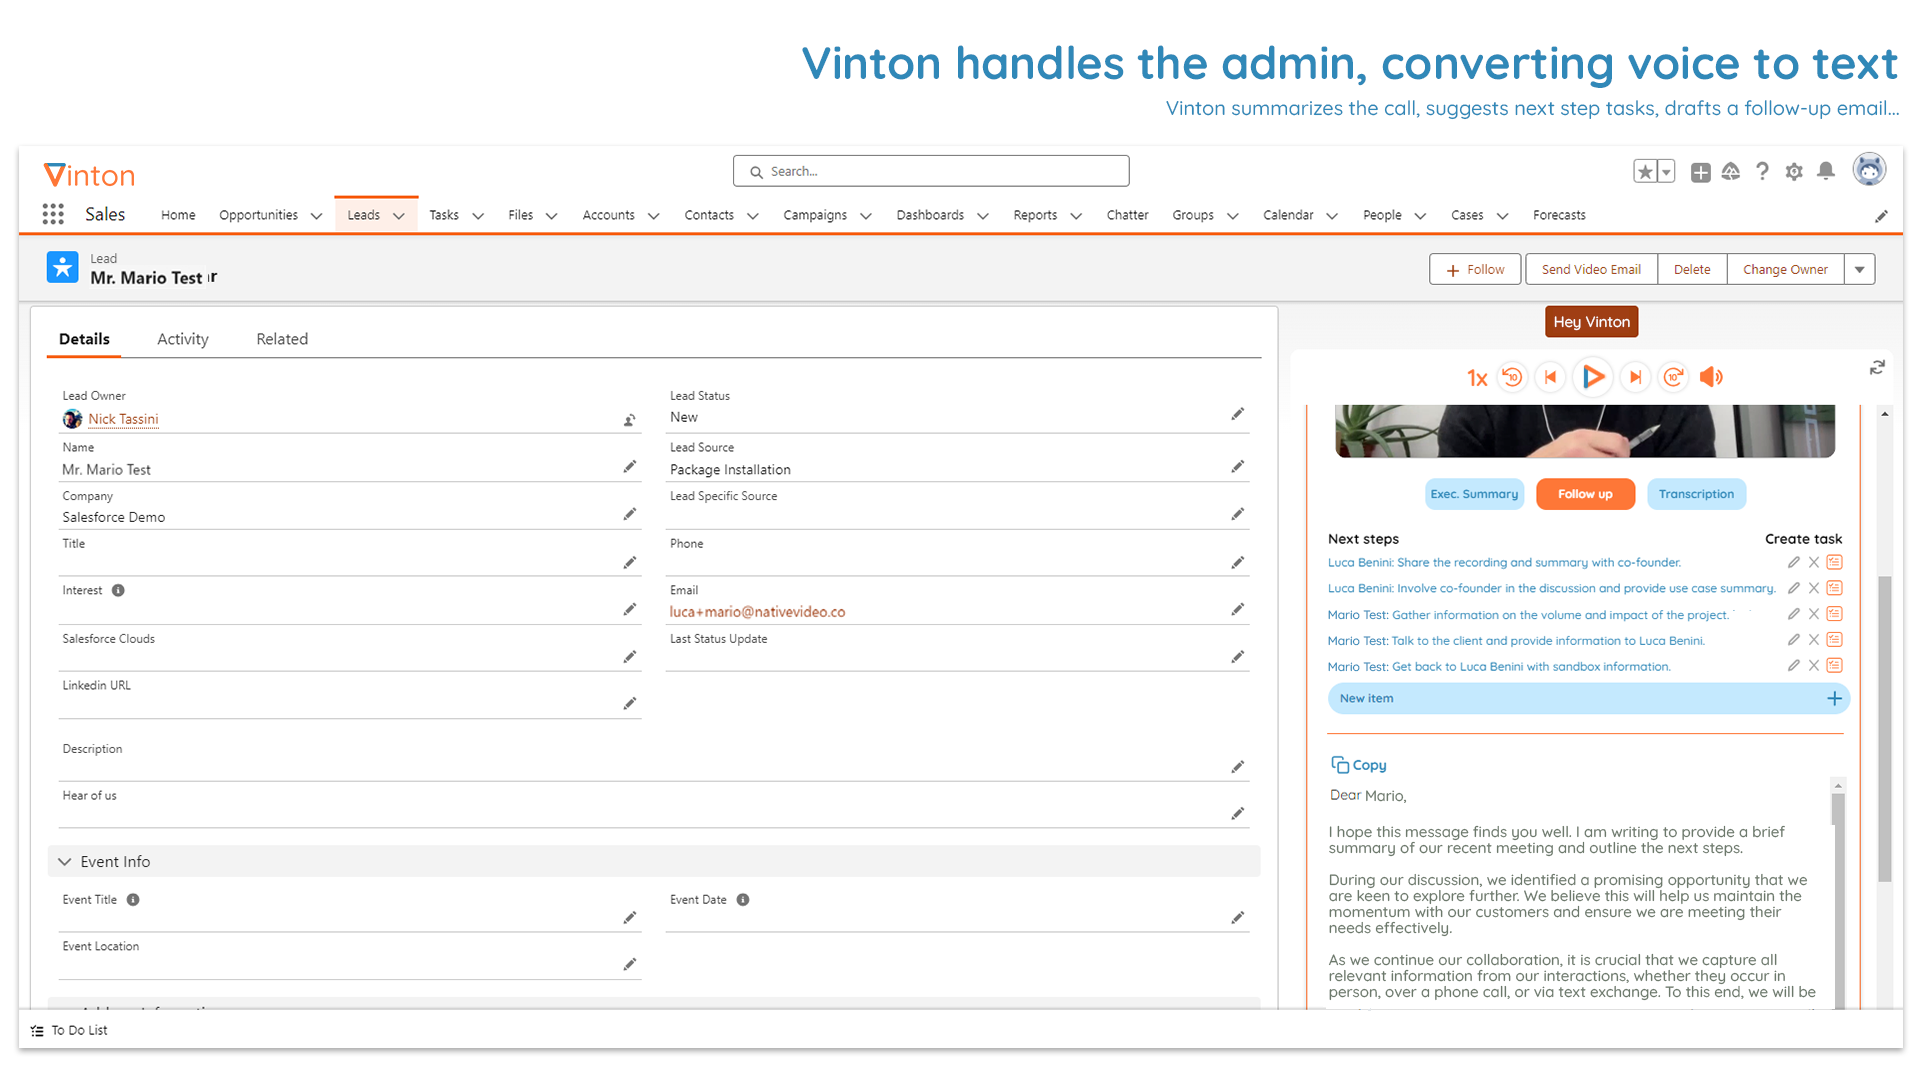 Vinton suggests next step actions that can be easily converted to Salesforce tasks and also drafts a follow-up email that summarizes the call, saving a ton of admin time for sales teams.